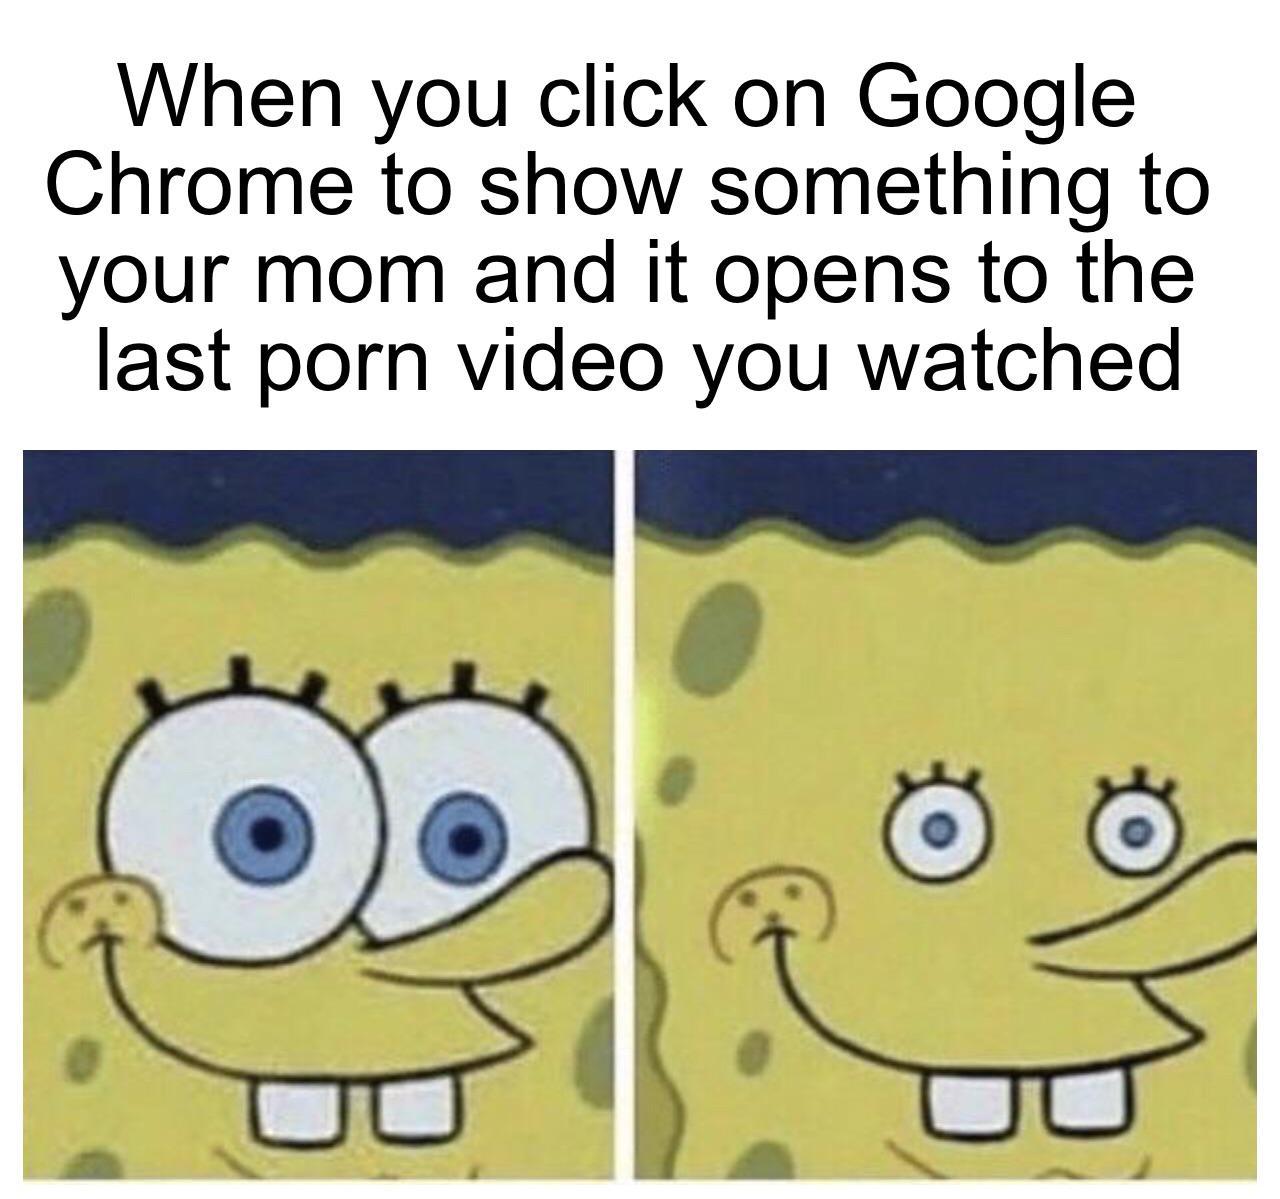 you re going 80 in a school zone - When you click on Google Chrome to show something to your mom and it opens to the last porn video you watched